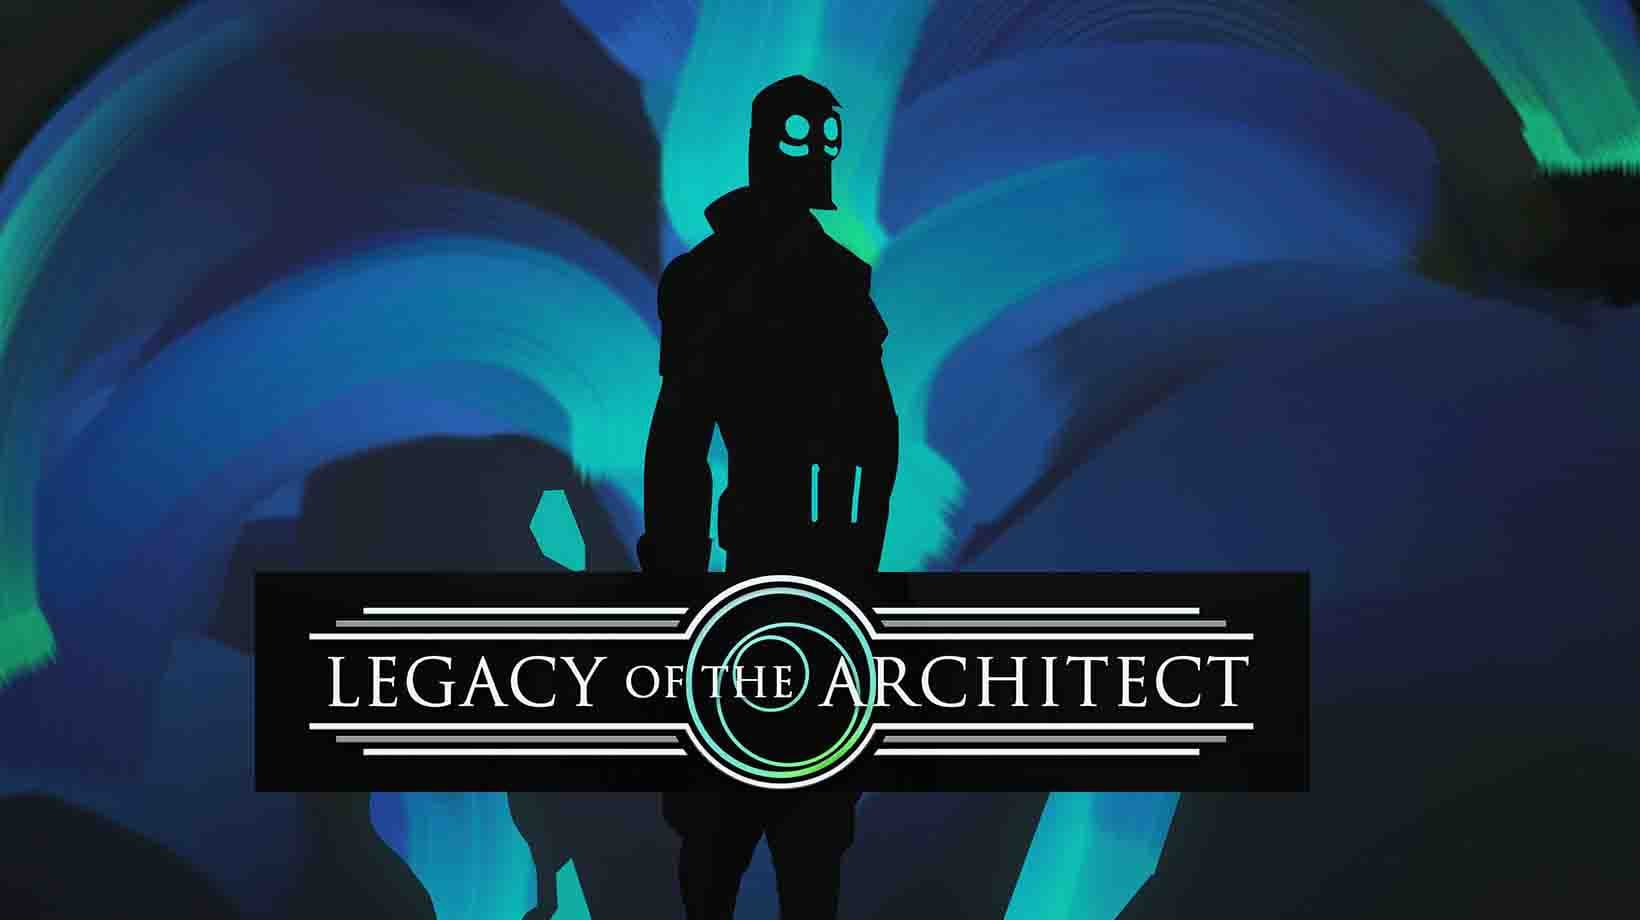 Legacy of the architect